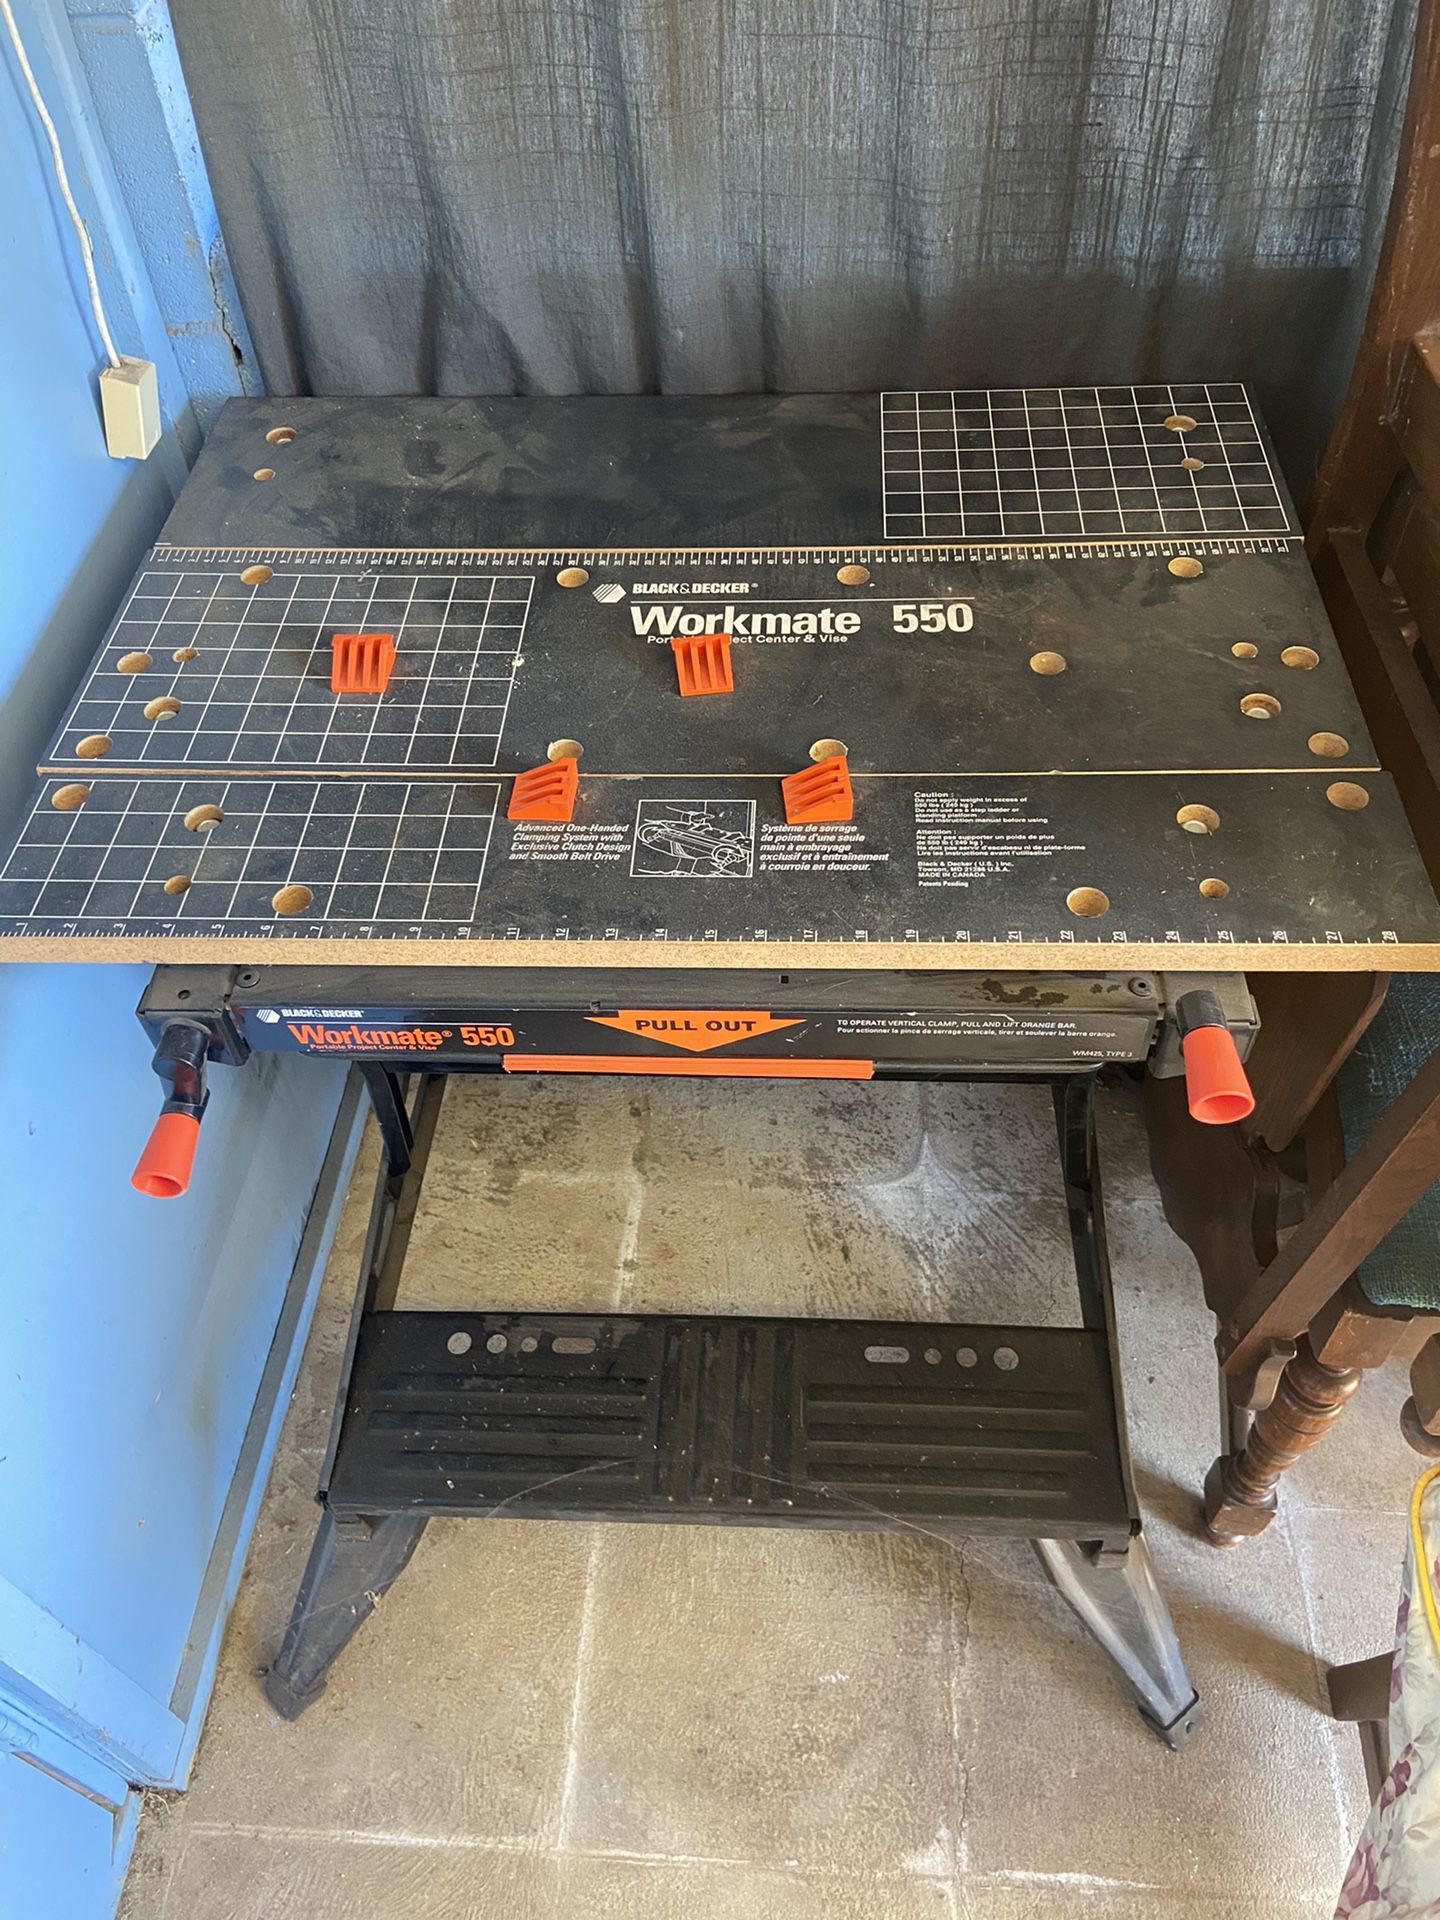 Black And Decker Workmate 425 - portable workbench for Sale in South  Hampton, NH - OfferUp